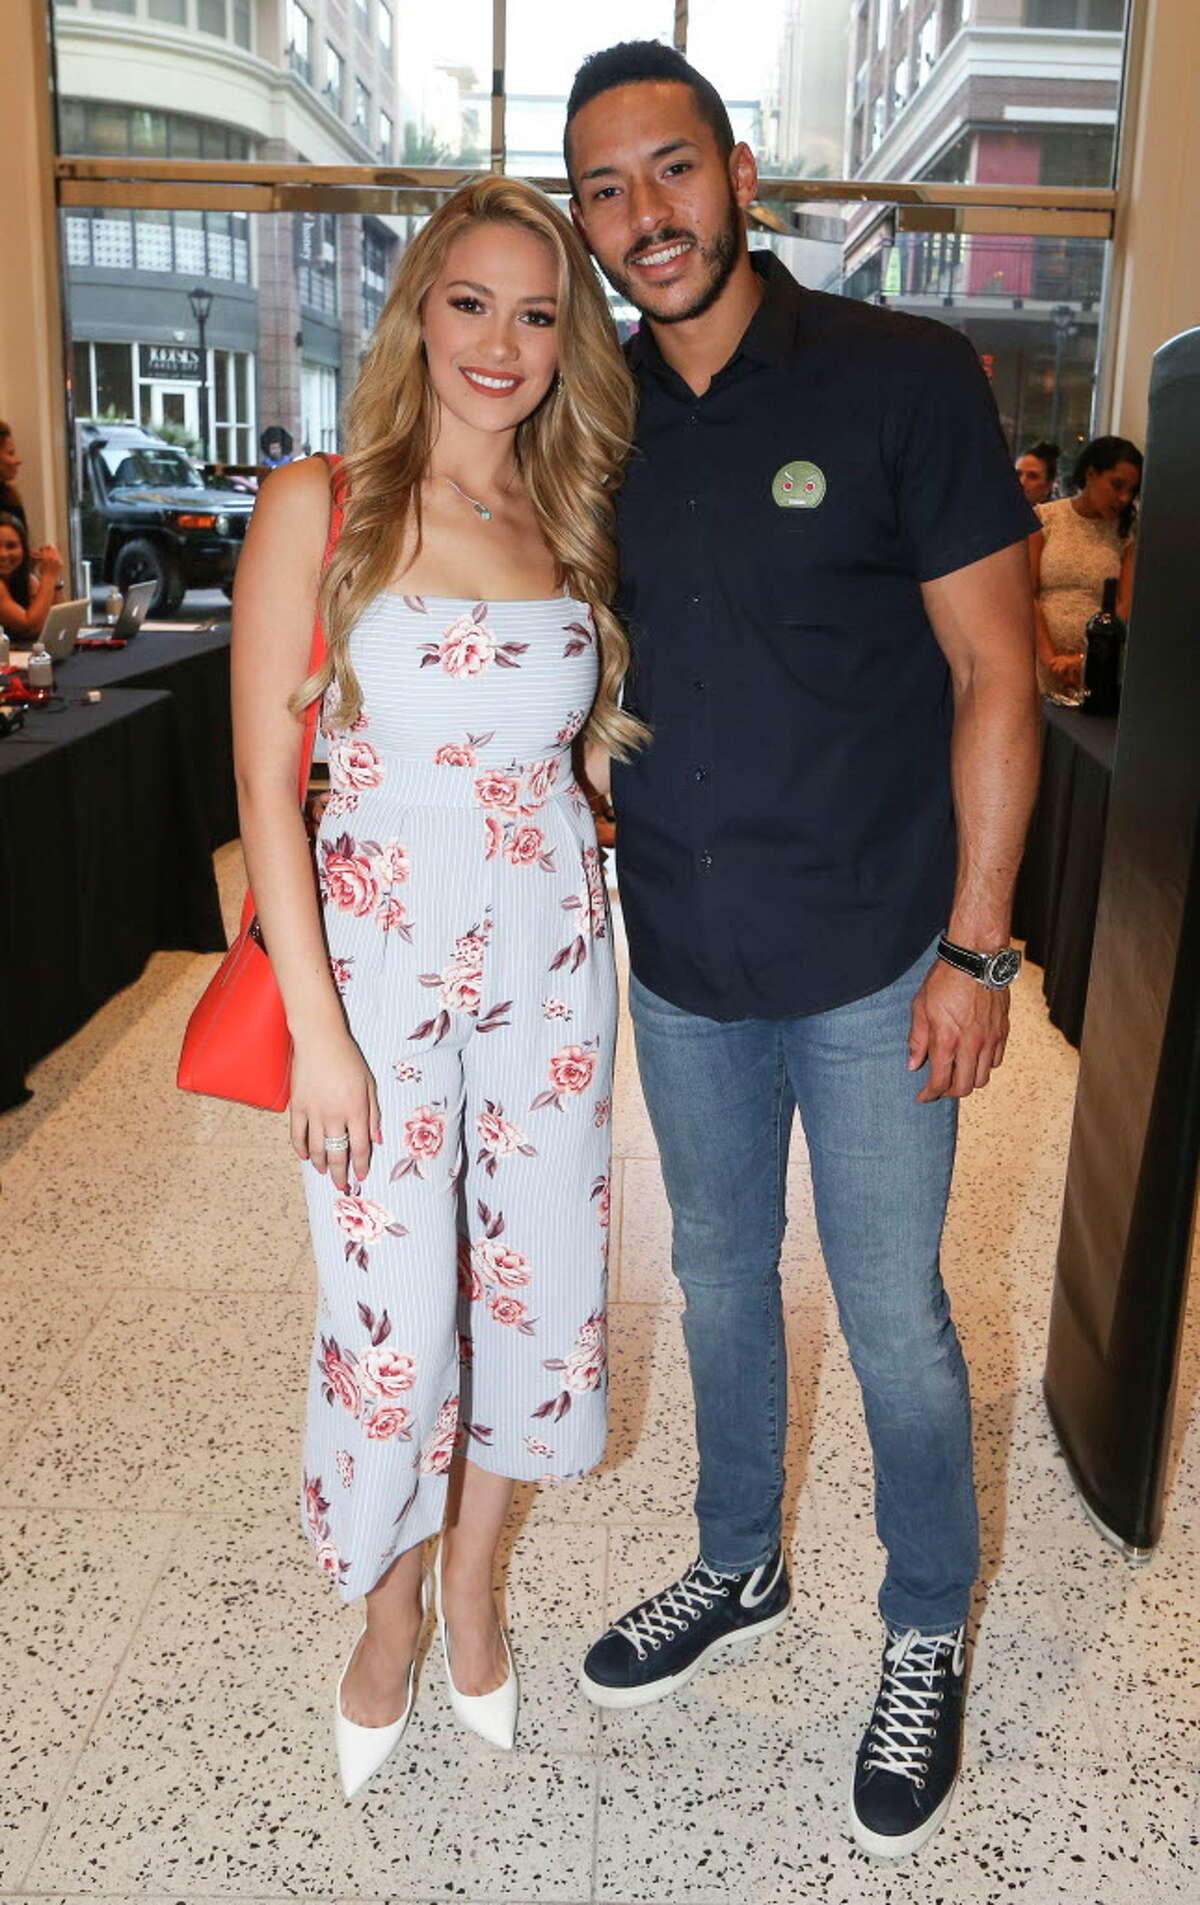 Houston Astros shortstop Carlos Correa is set to marry Daniella Rodriguez in December 2019.   Houston Astros player Carlos Correa and fiancé Daniella Rodriguez pose for a photograph at "Team Up for Kids and K9s" benefit. >>> Click through to meet Texas USA 2016 Daniella Rodriguez.